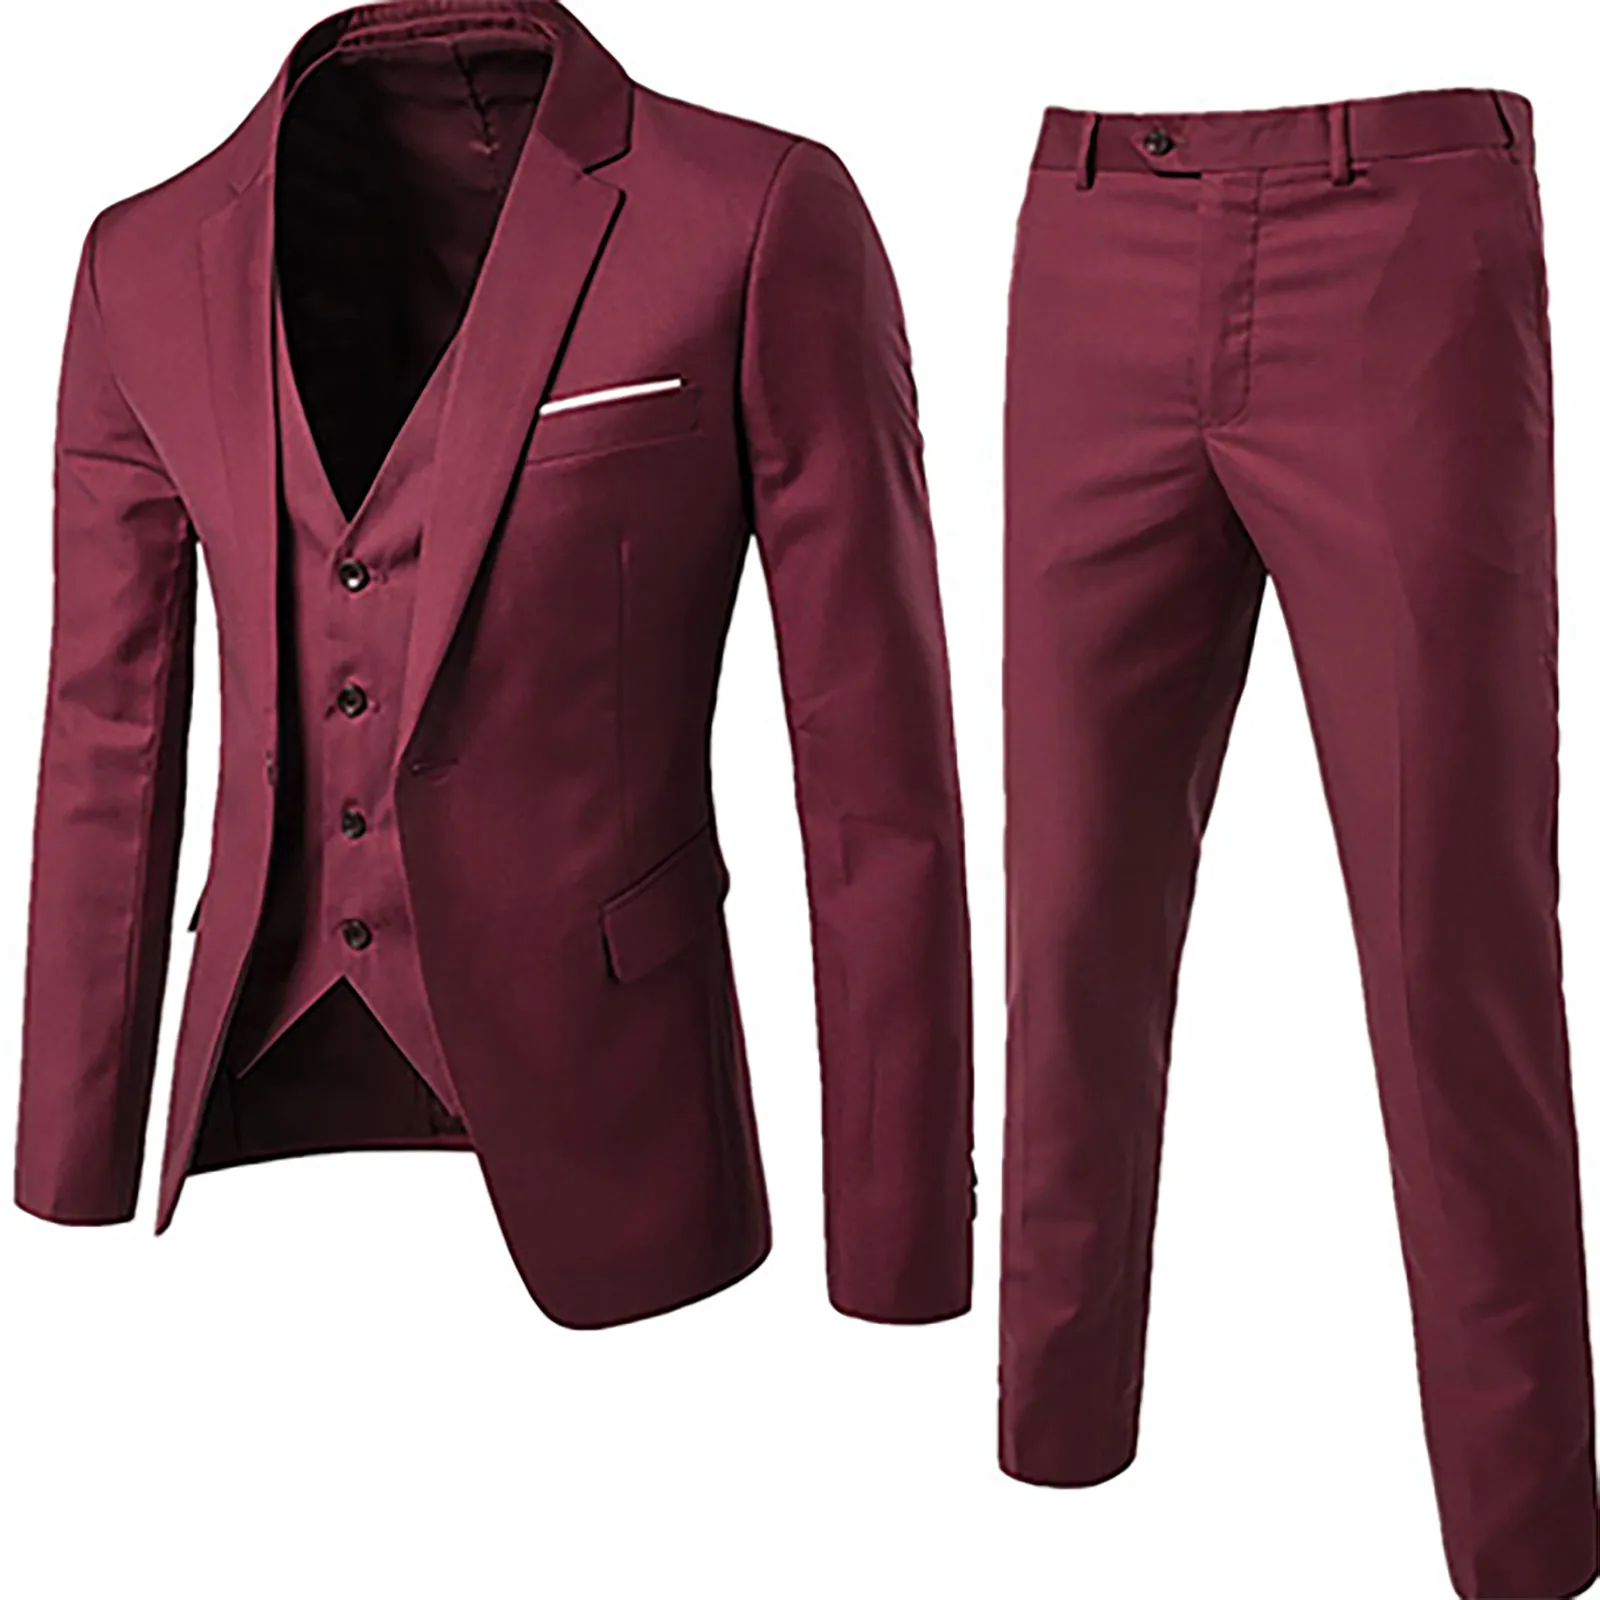 2022 New Arrival Wine Red Men Suits 3pieces Jacket Pant Vest High Quality Slim Fit Blazer Formal Prom Terno Clothes Fashion Hot